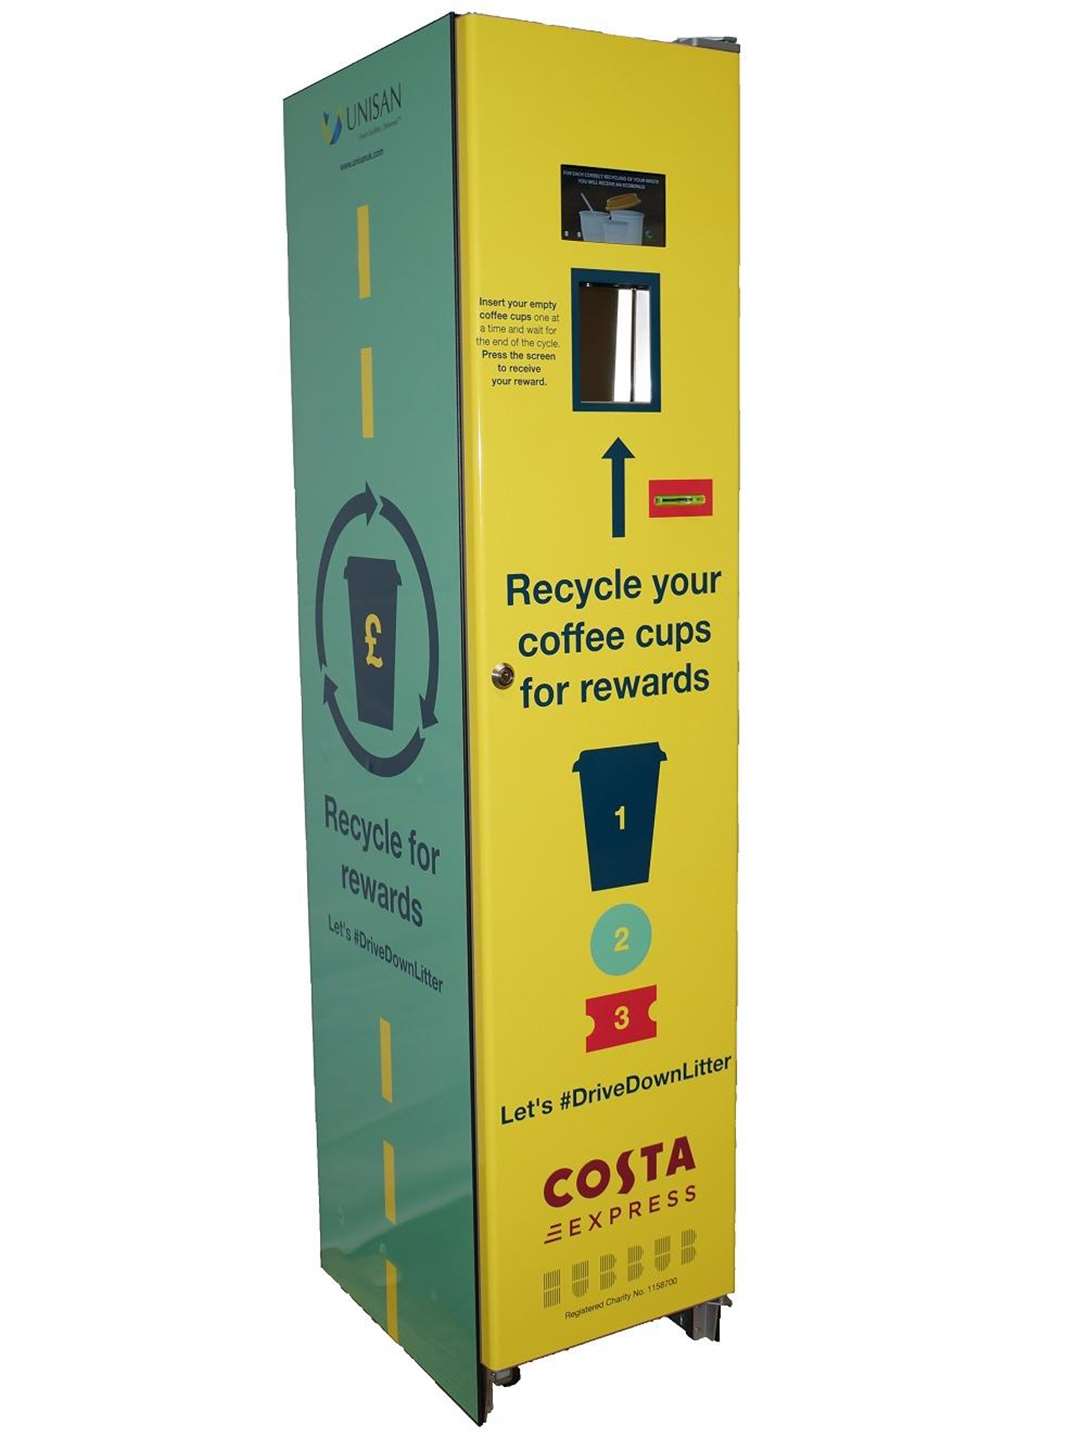 The recycling machines will be launched on Thursday